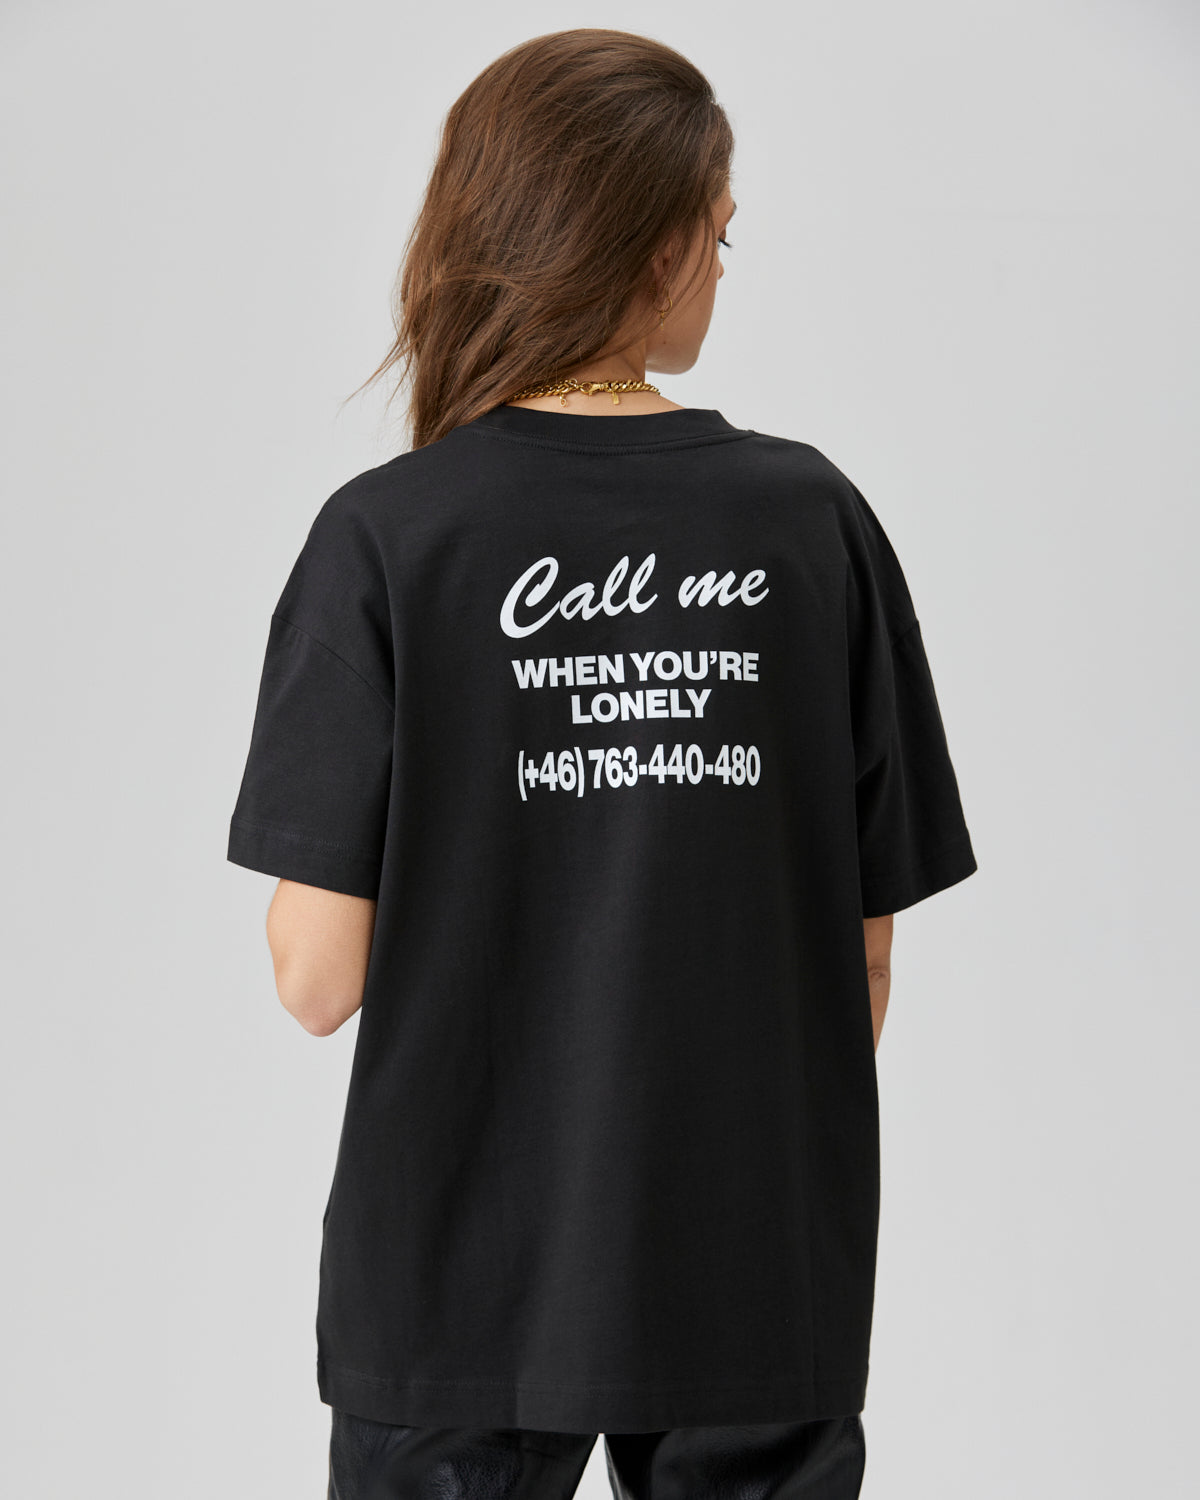 Call Me T-shirt – The Classy Issue